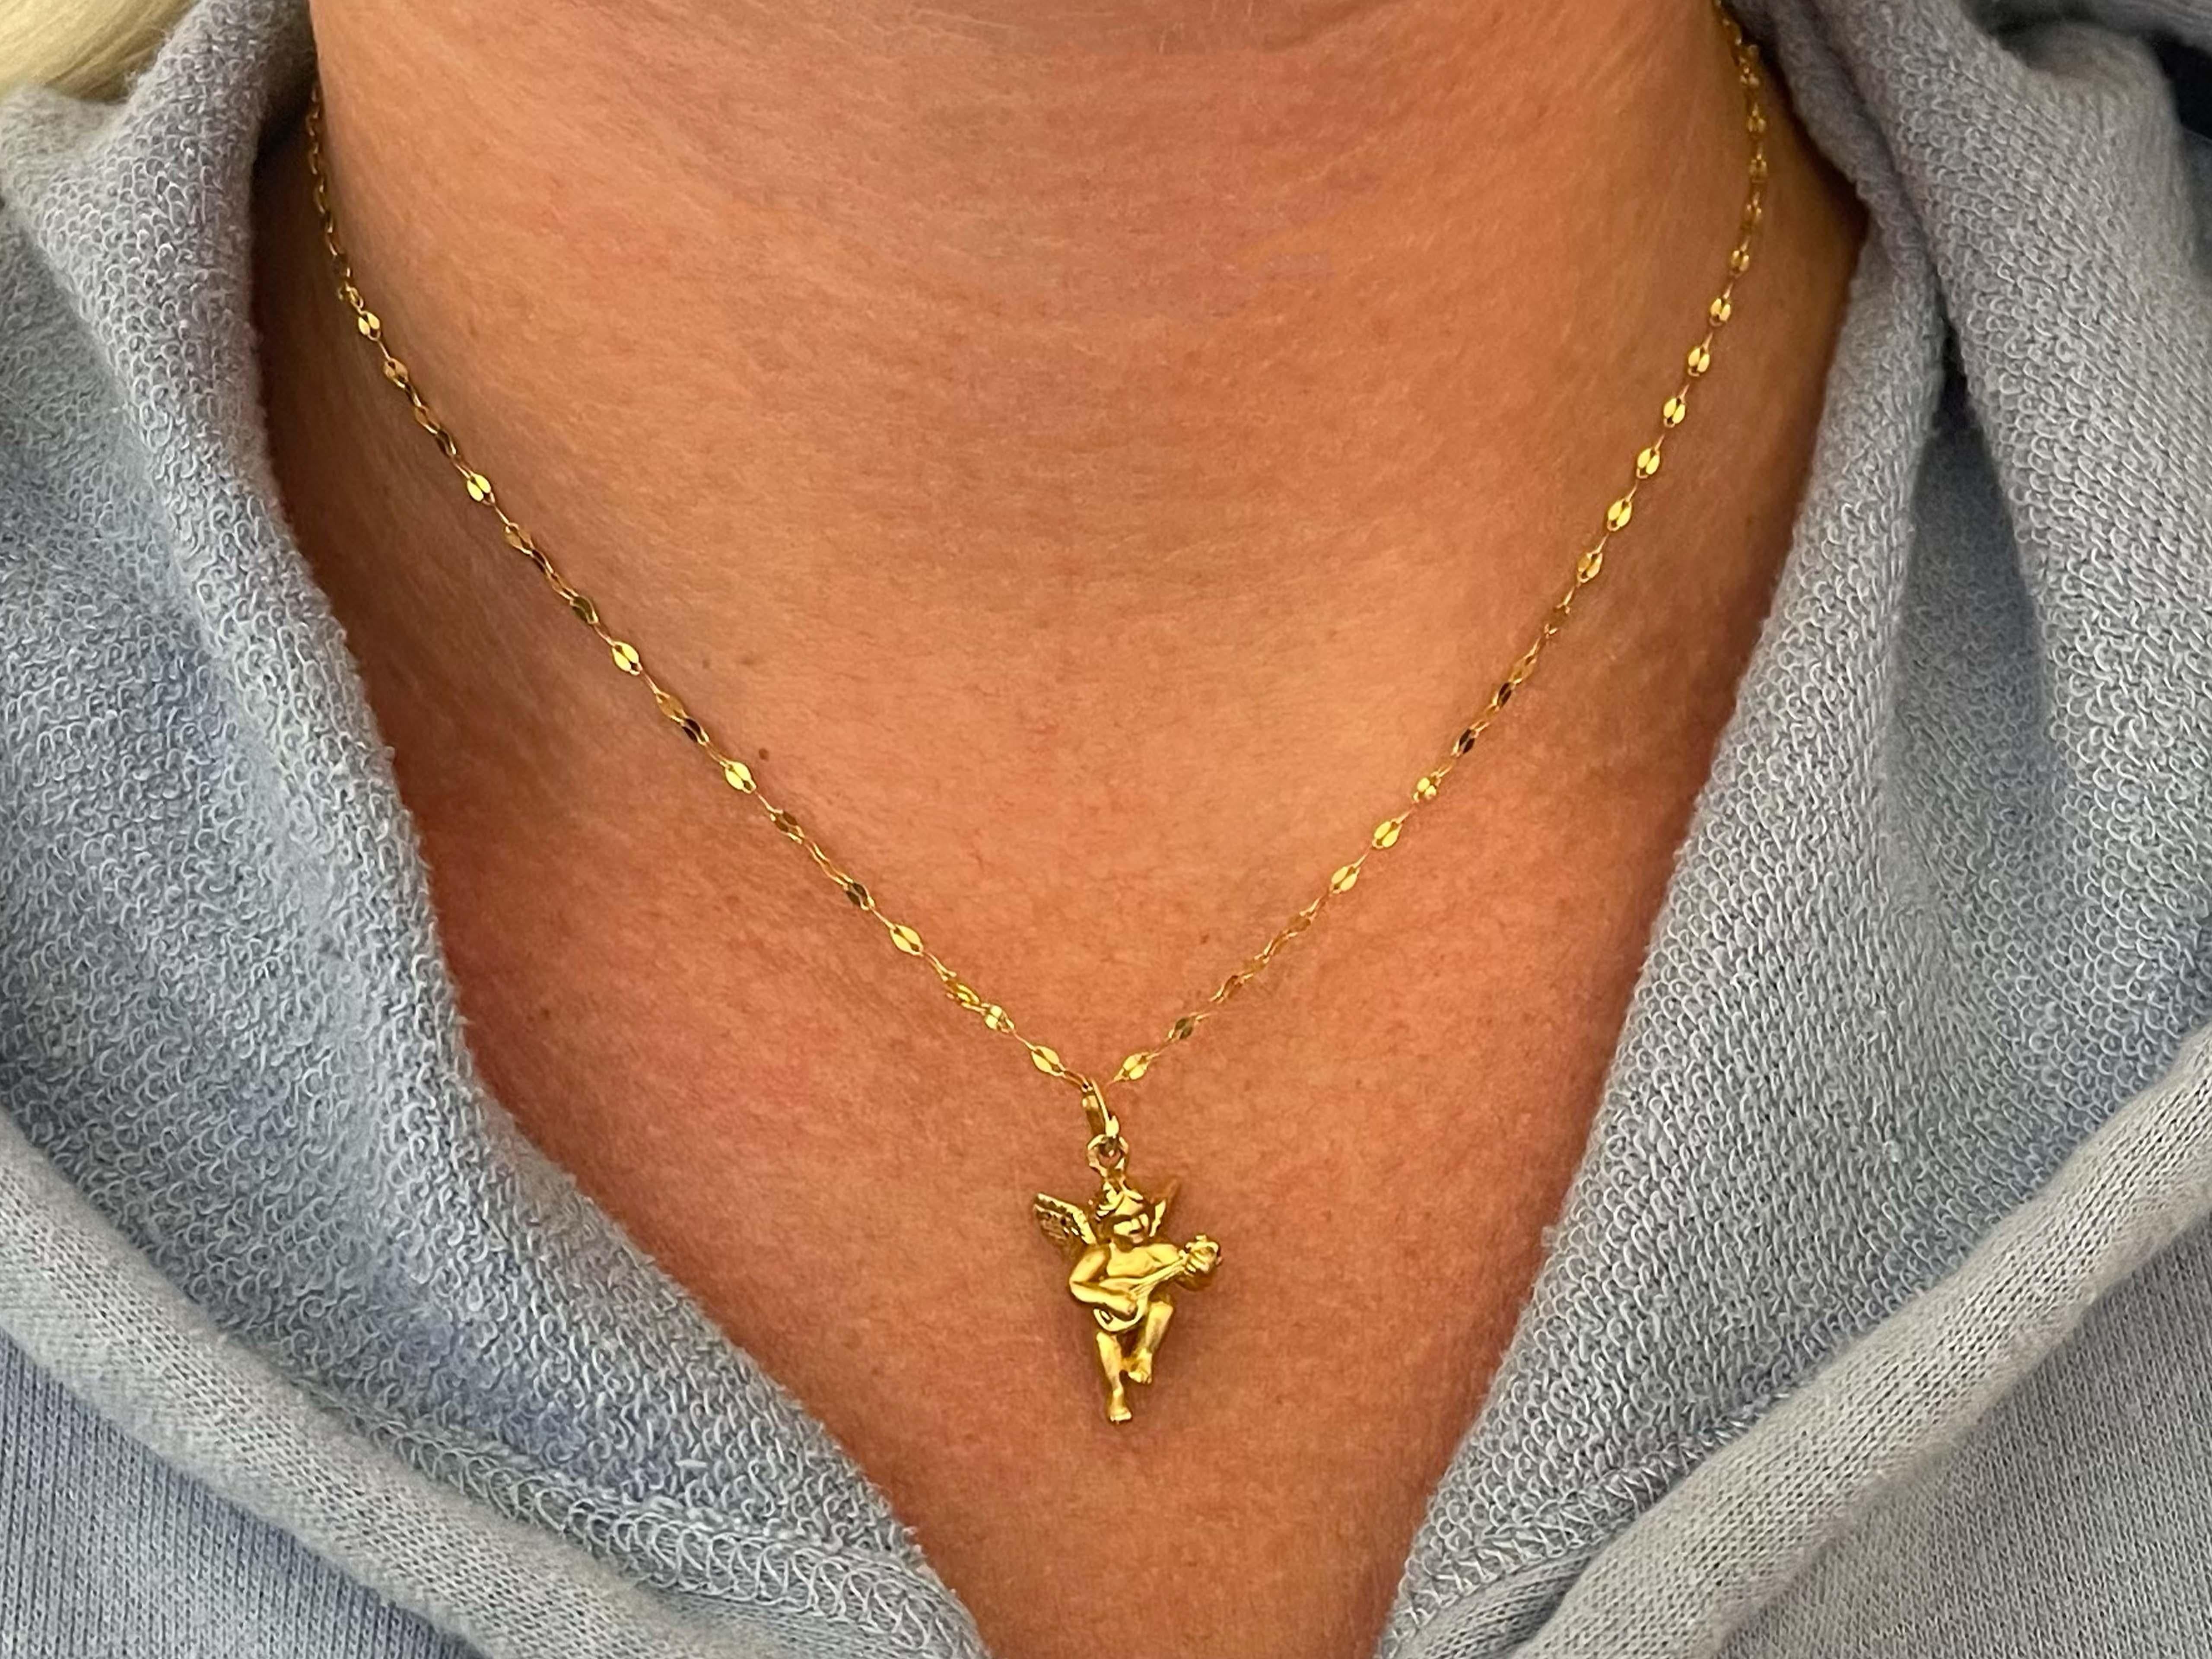 This pendant and chain is richly crafted in 18k yellow gold. The pendant measures 19 mm x 16 mm and comes on a 18 inch fancy link chain with a spring ring. The chain and pendant are stamped 